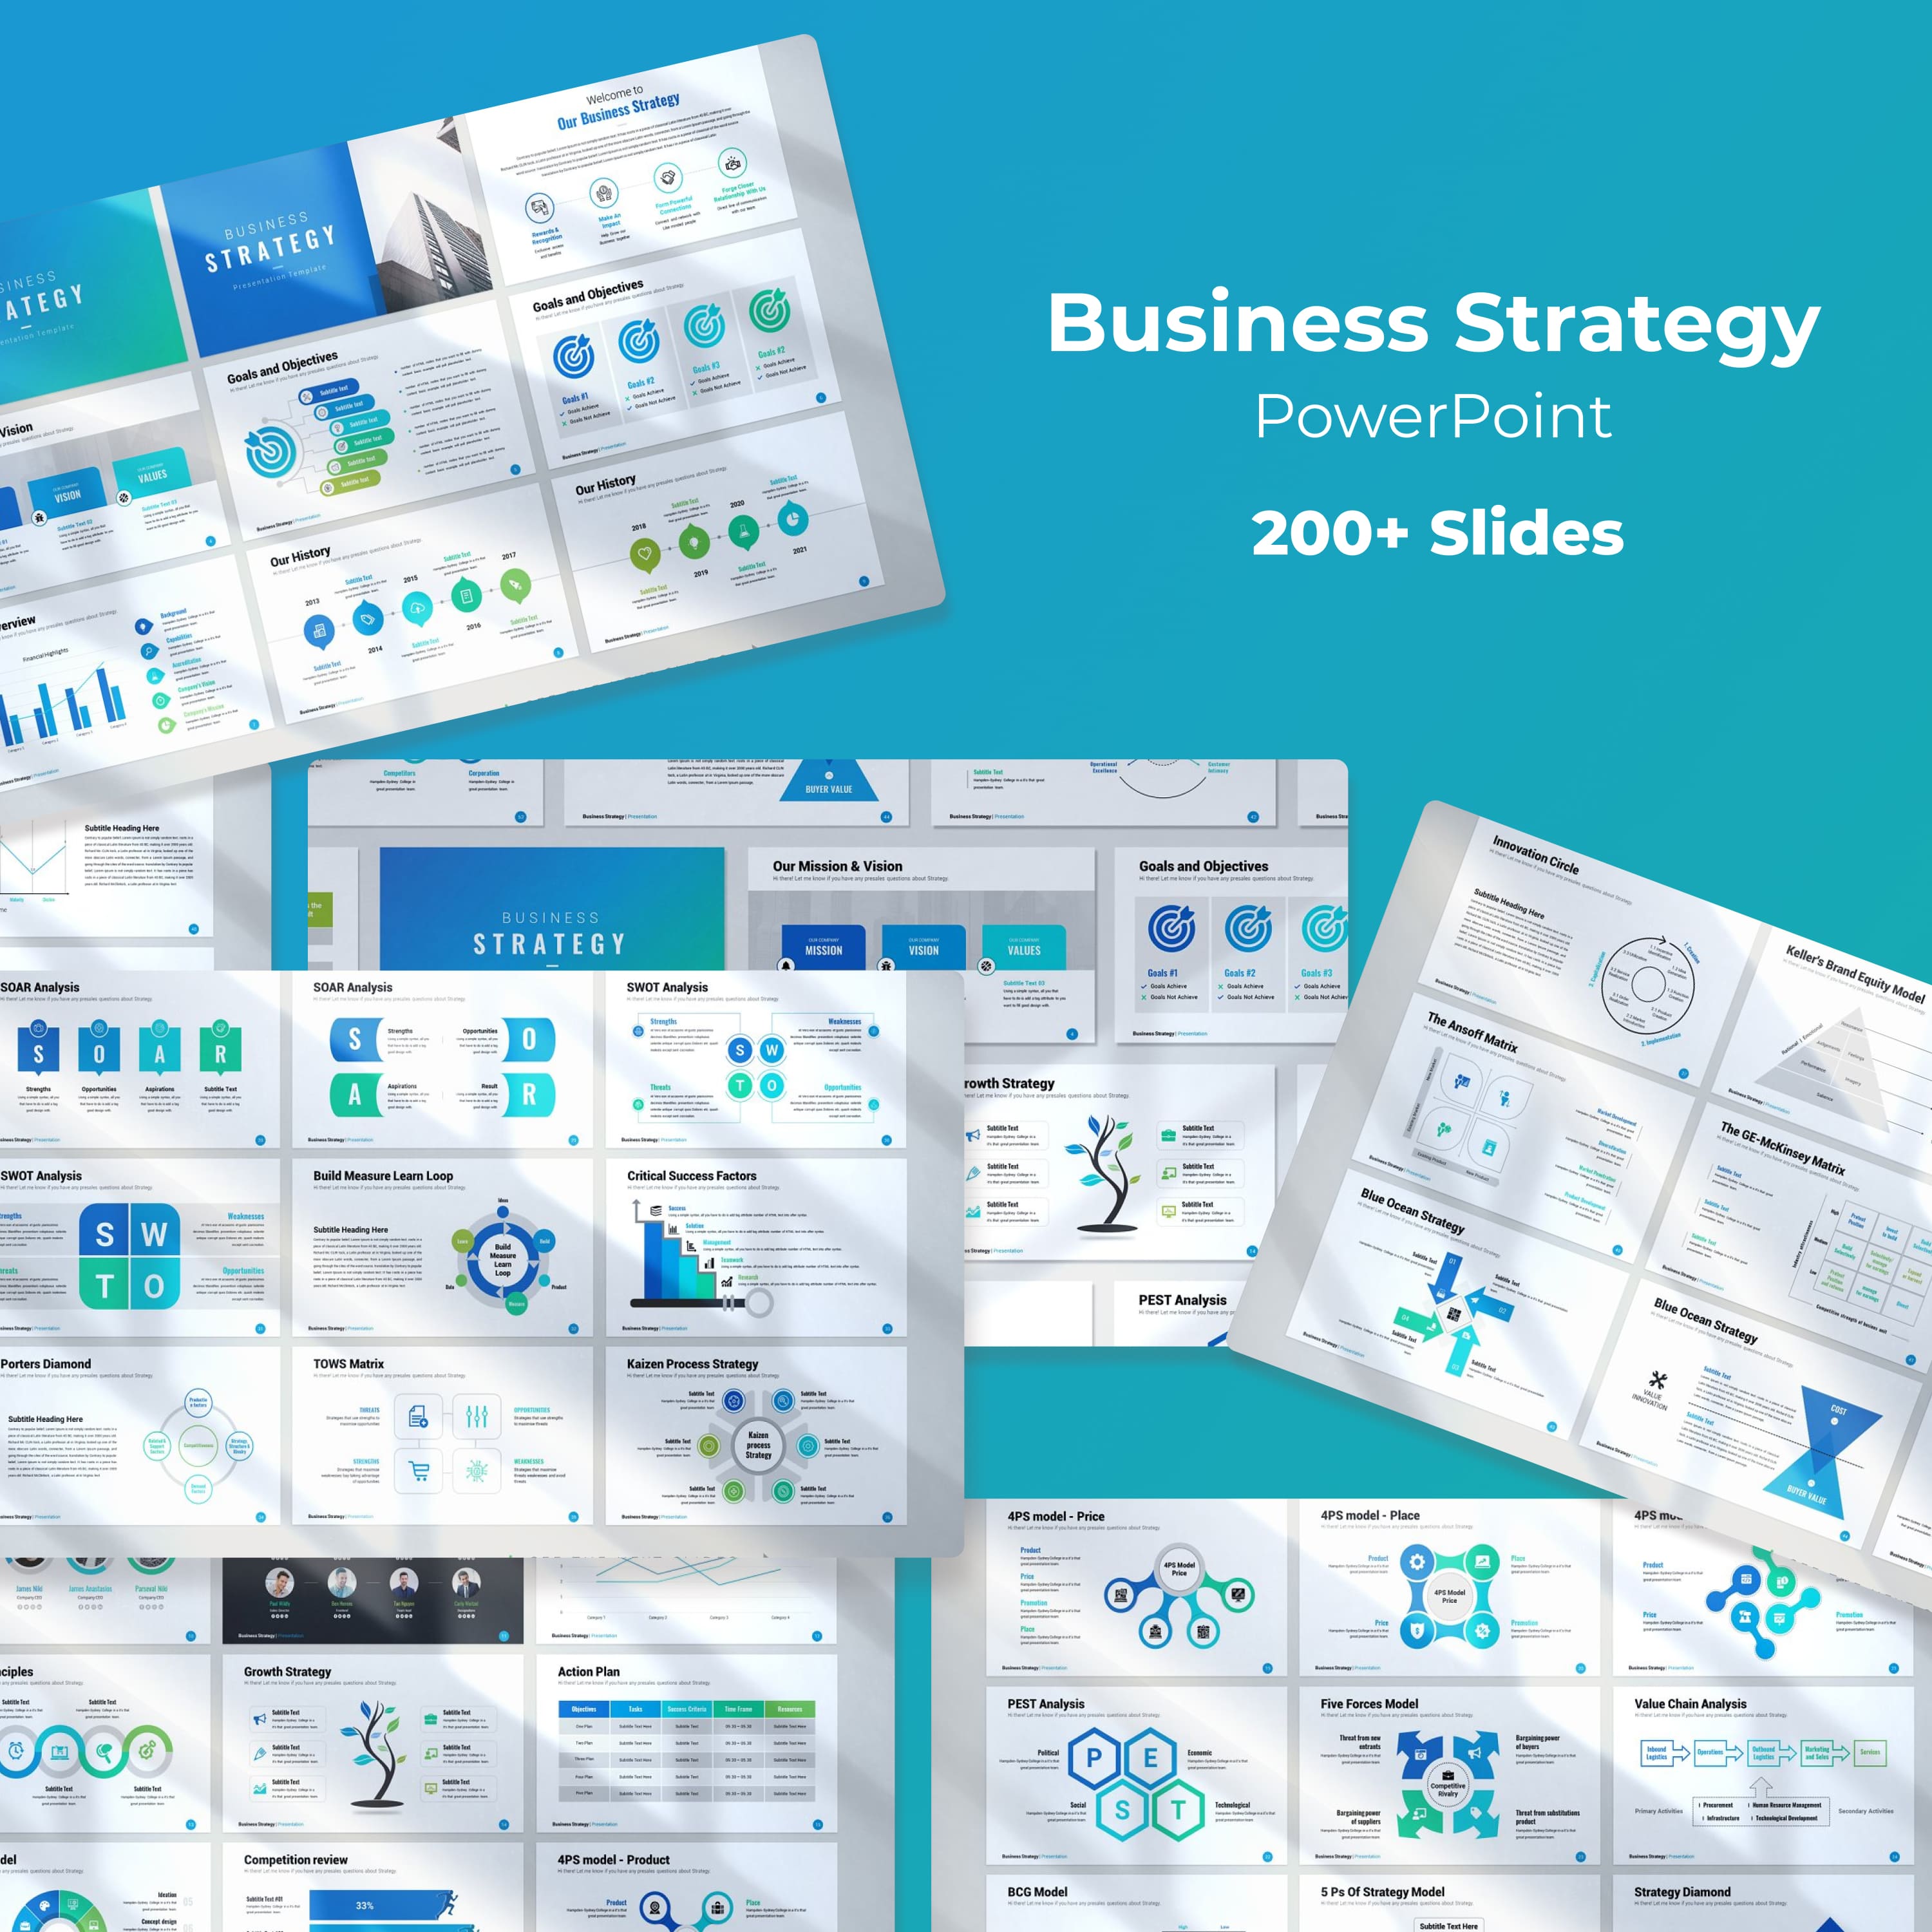 Business Strategy PowerPoint cover.